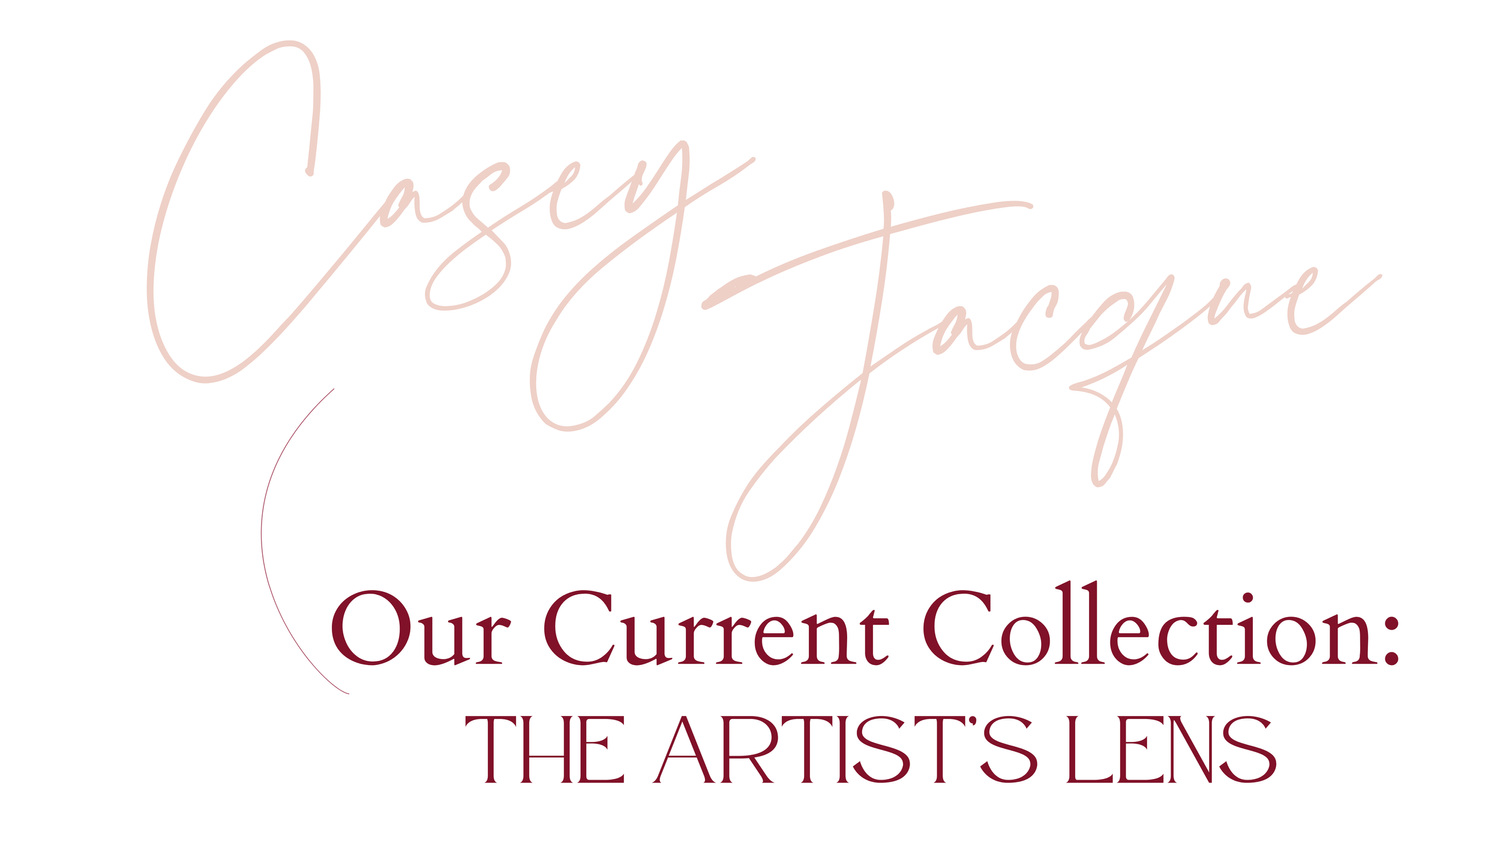 Casey Jacque: A Trusted Resource for The Vital Creatives in the Creative Economy